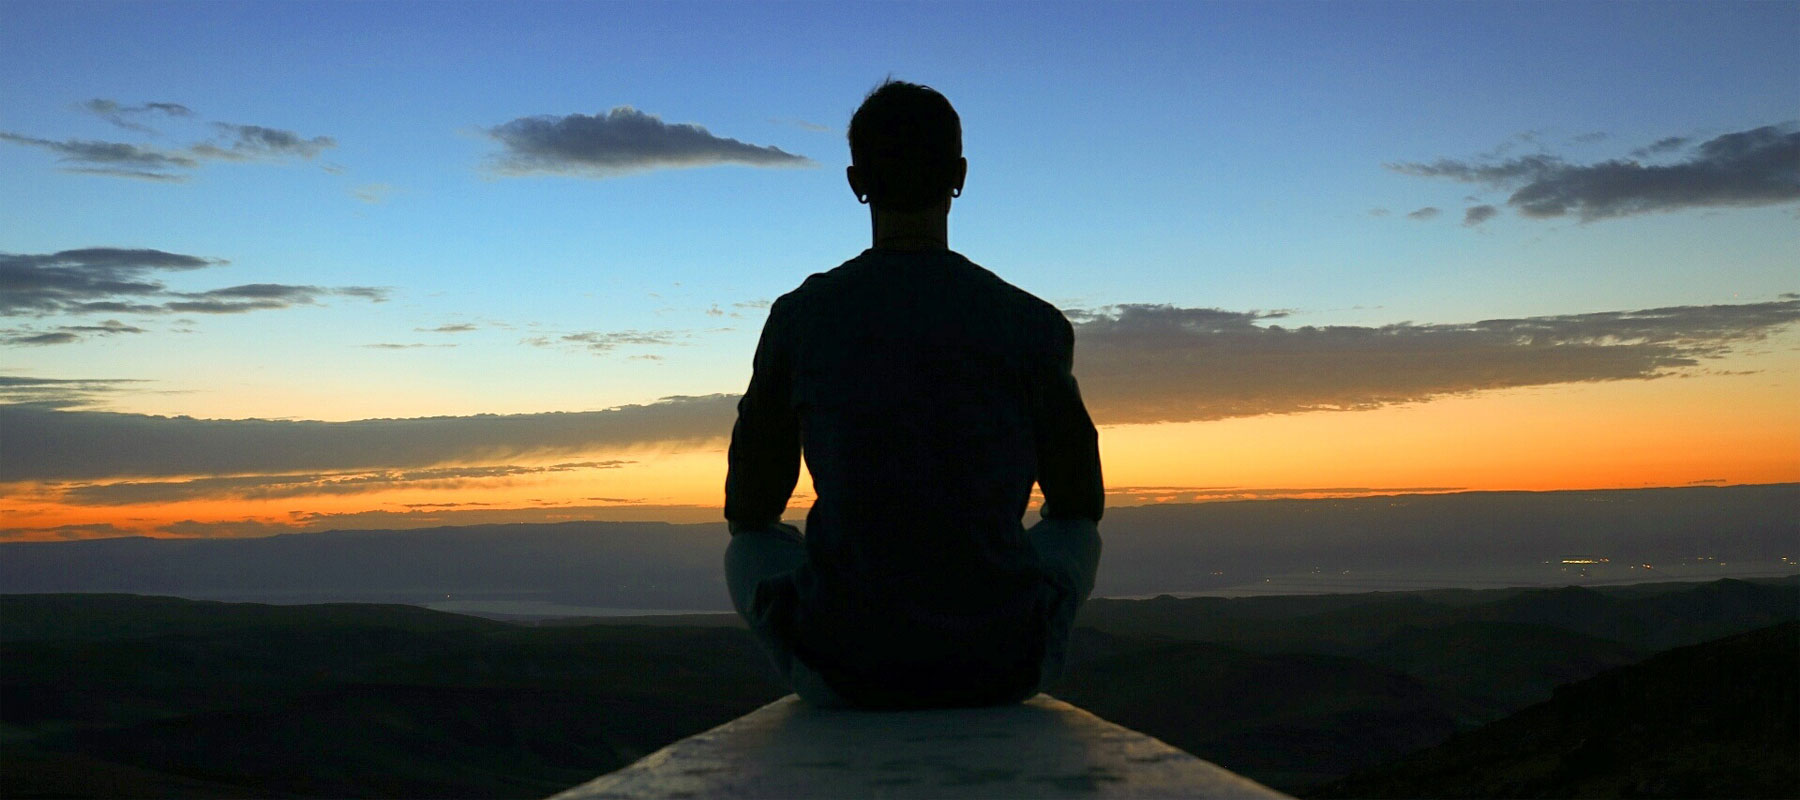 Image of contemplation. Photo of man meditating in nature at sunset.